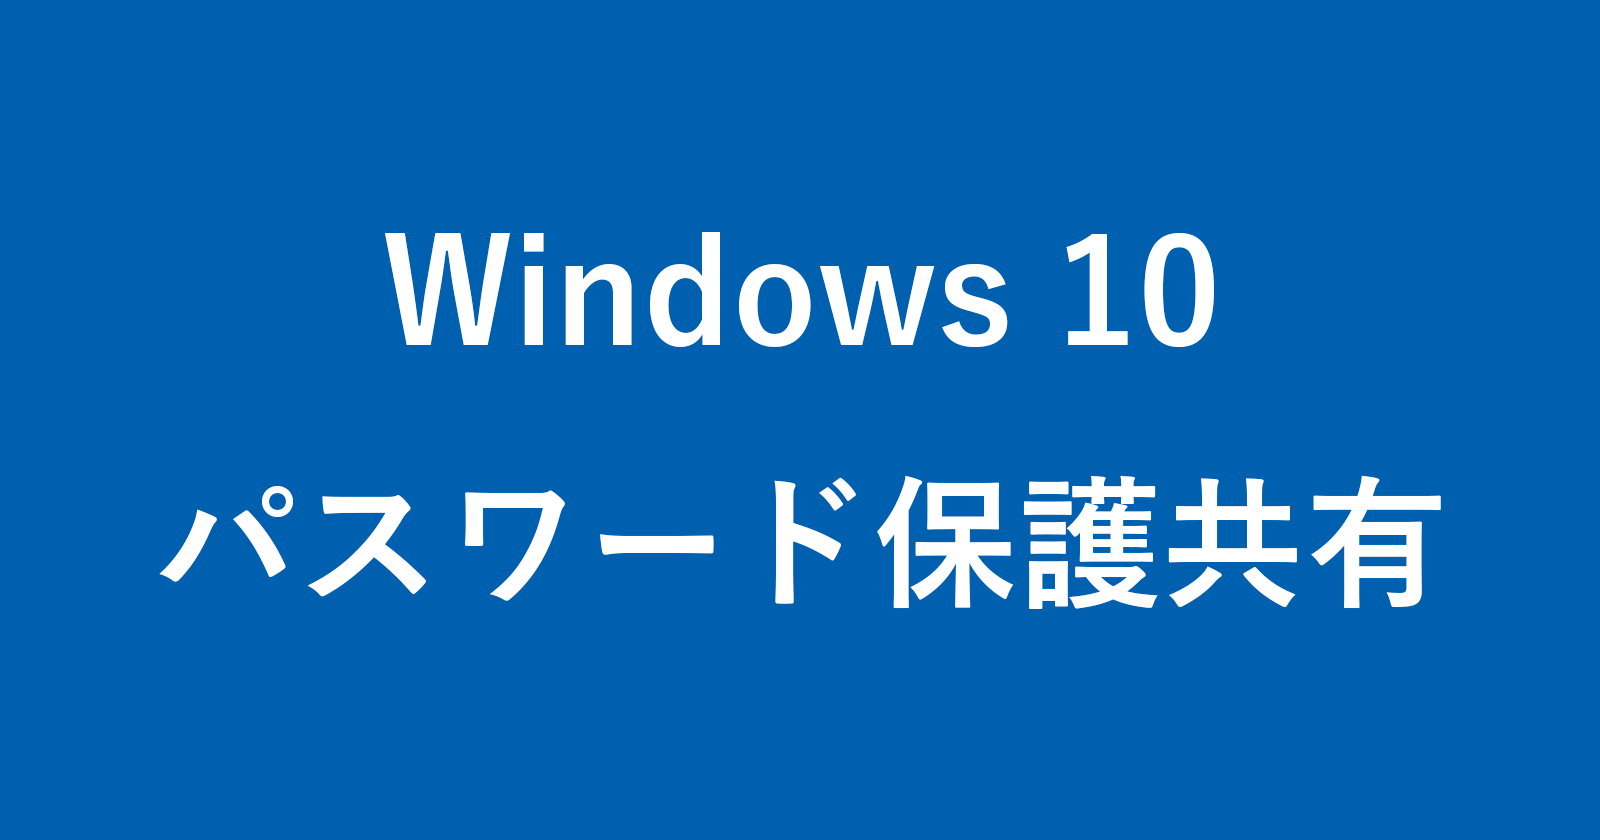 windows 10 password protected sharing